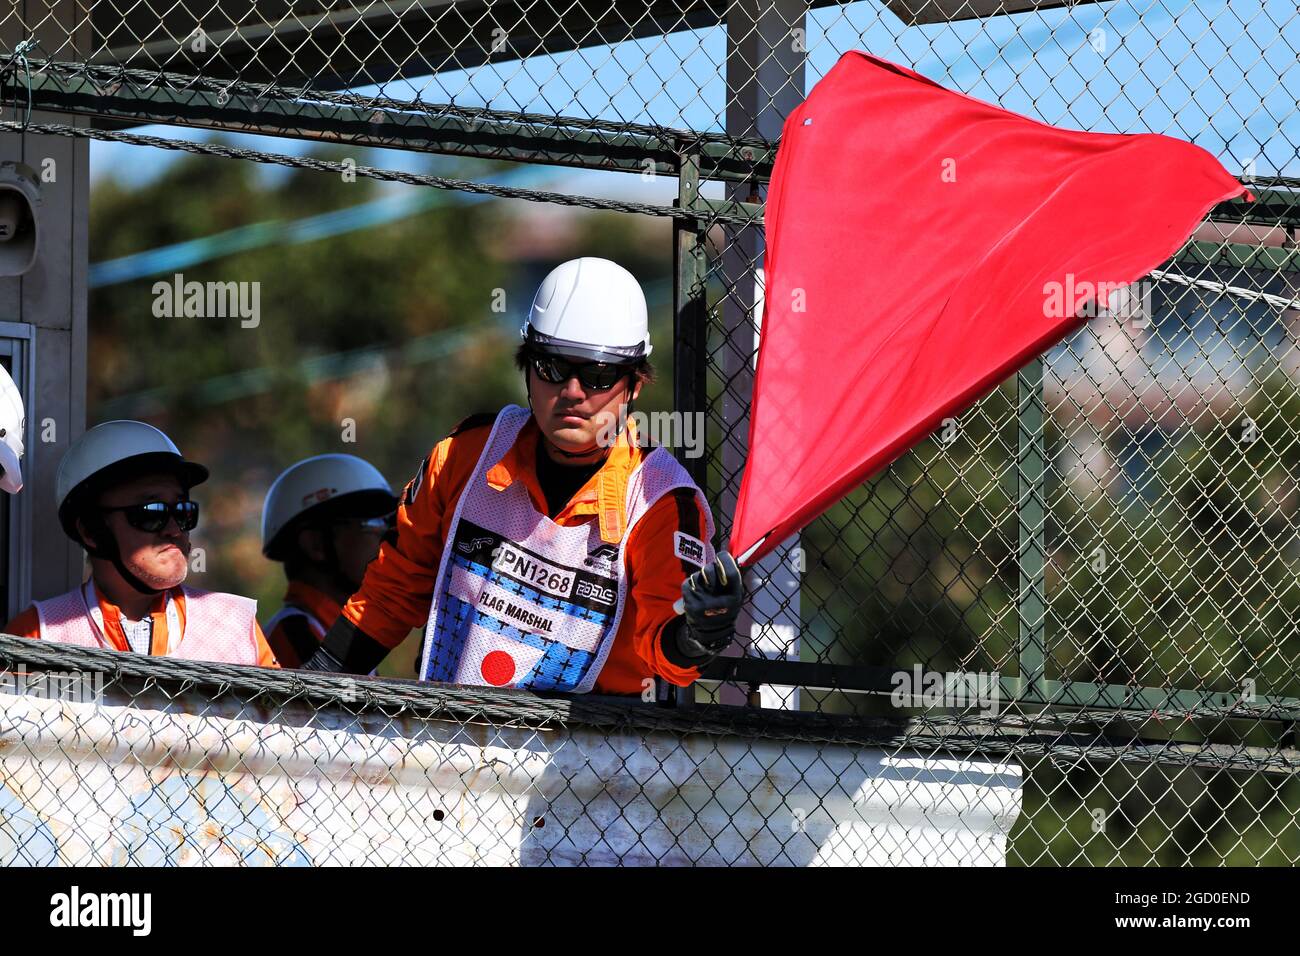 Red flag waved by a marshal. Japanese Grand Prix, Sunday 13th October 2019. Suzuka, Japan. Stock Photo